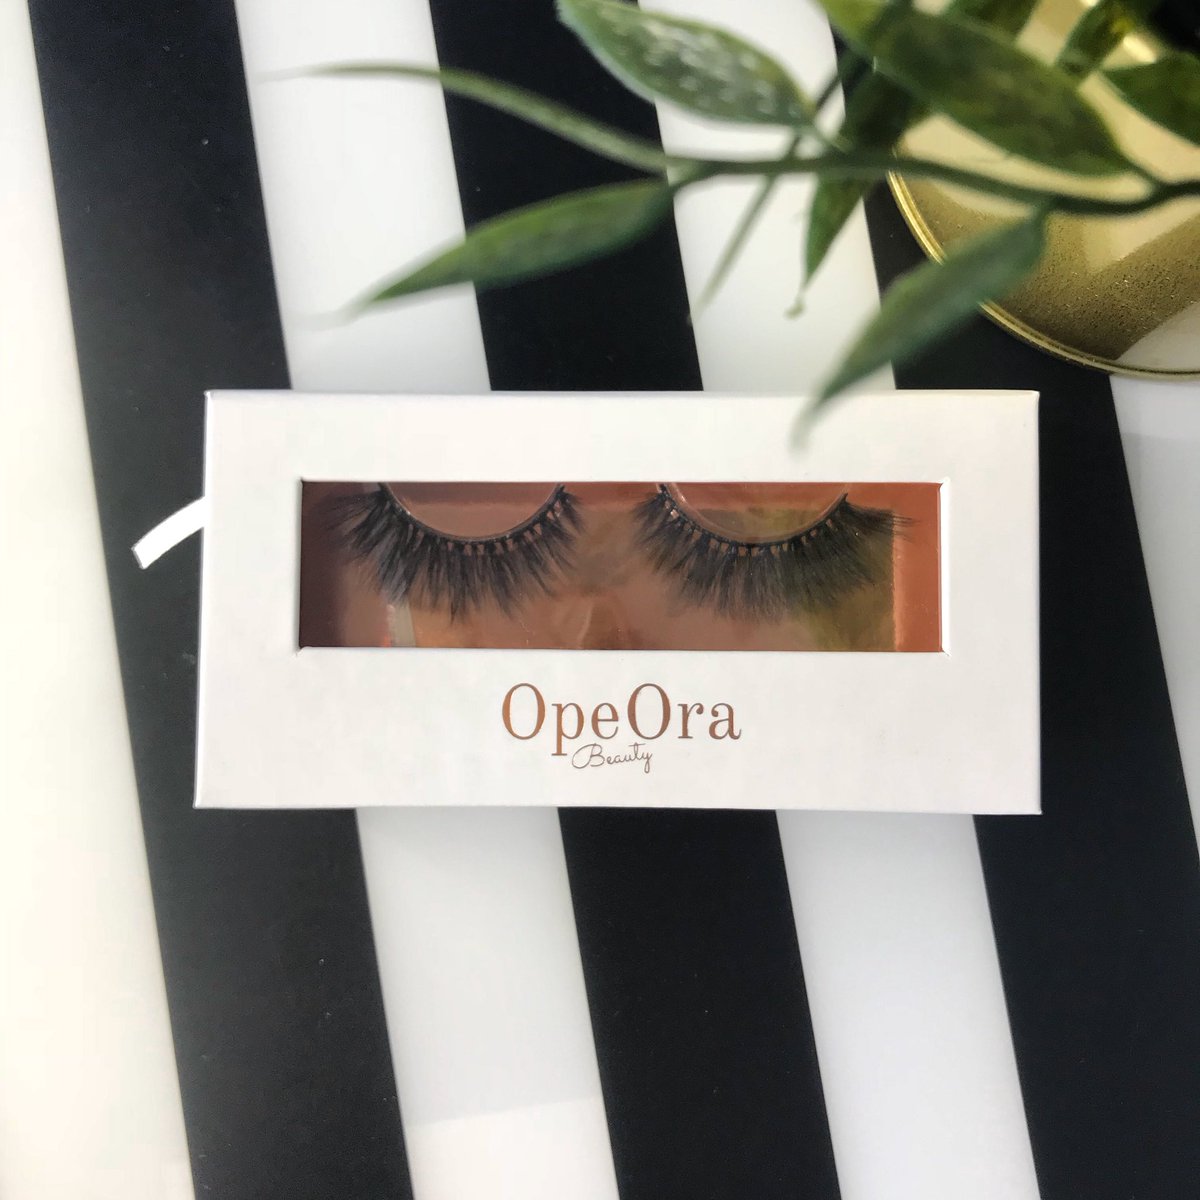 #opeorabeauty  3D Faux Mink lashes now available in store or online! 
houseofglamtx.com to shop! 

.
.
.
#lashes #beauty #fauxminklashes #glam #opeorabeauty #makeup #essentials #potd #motd #glamlashes #rosegold #giveitawink😉